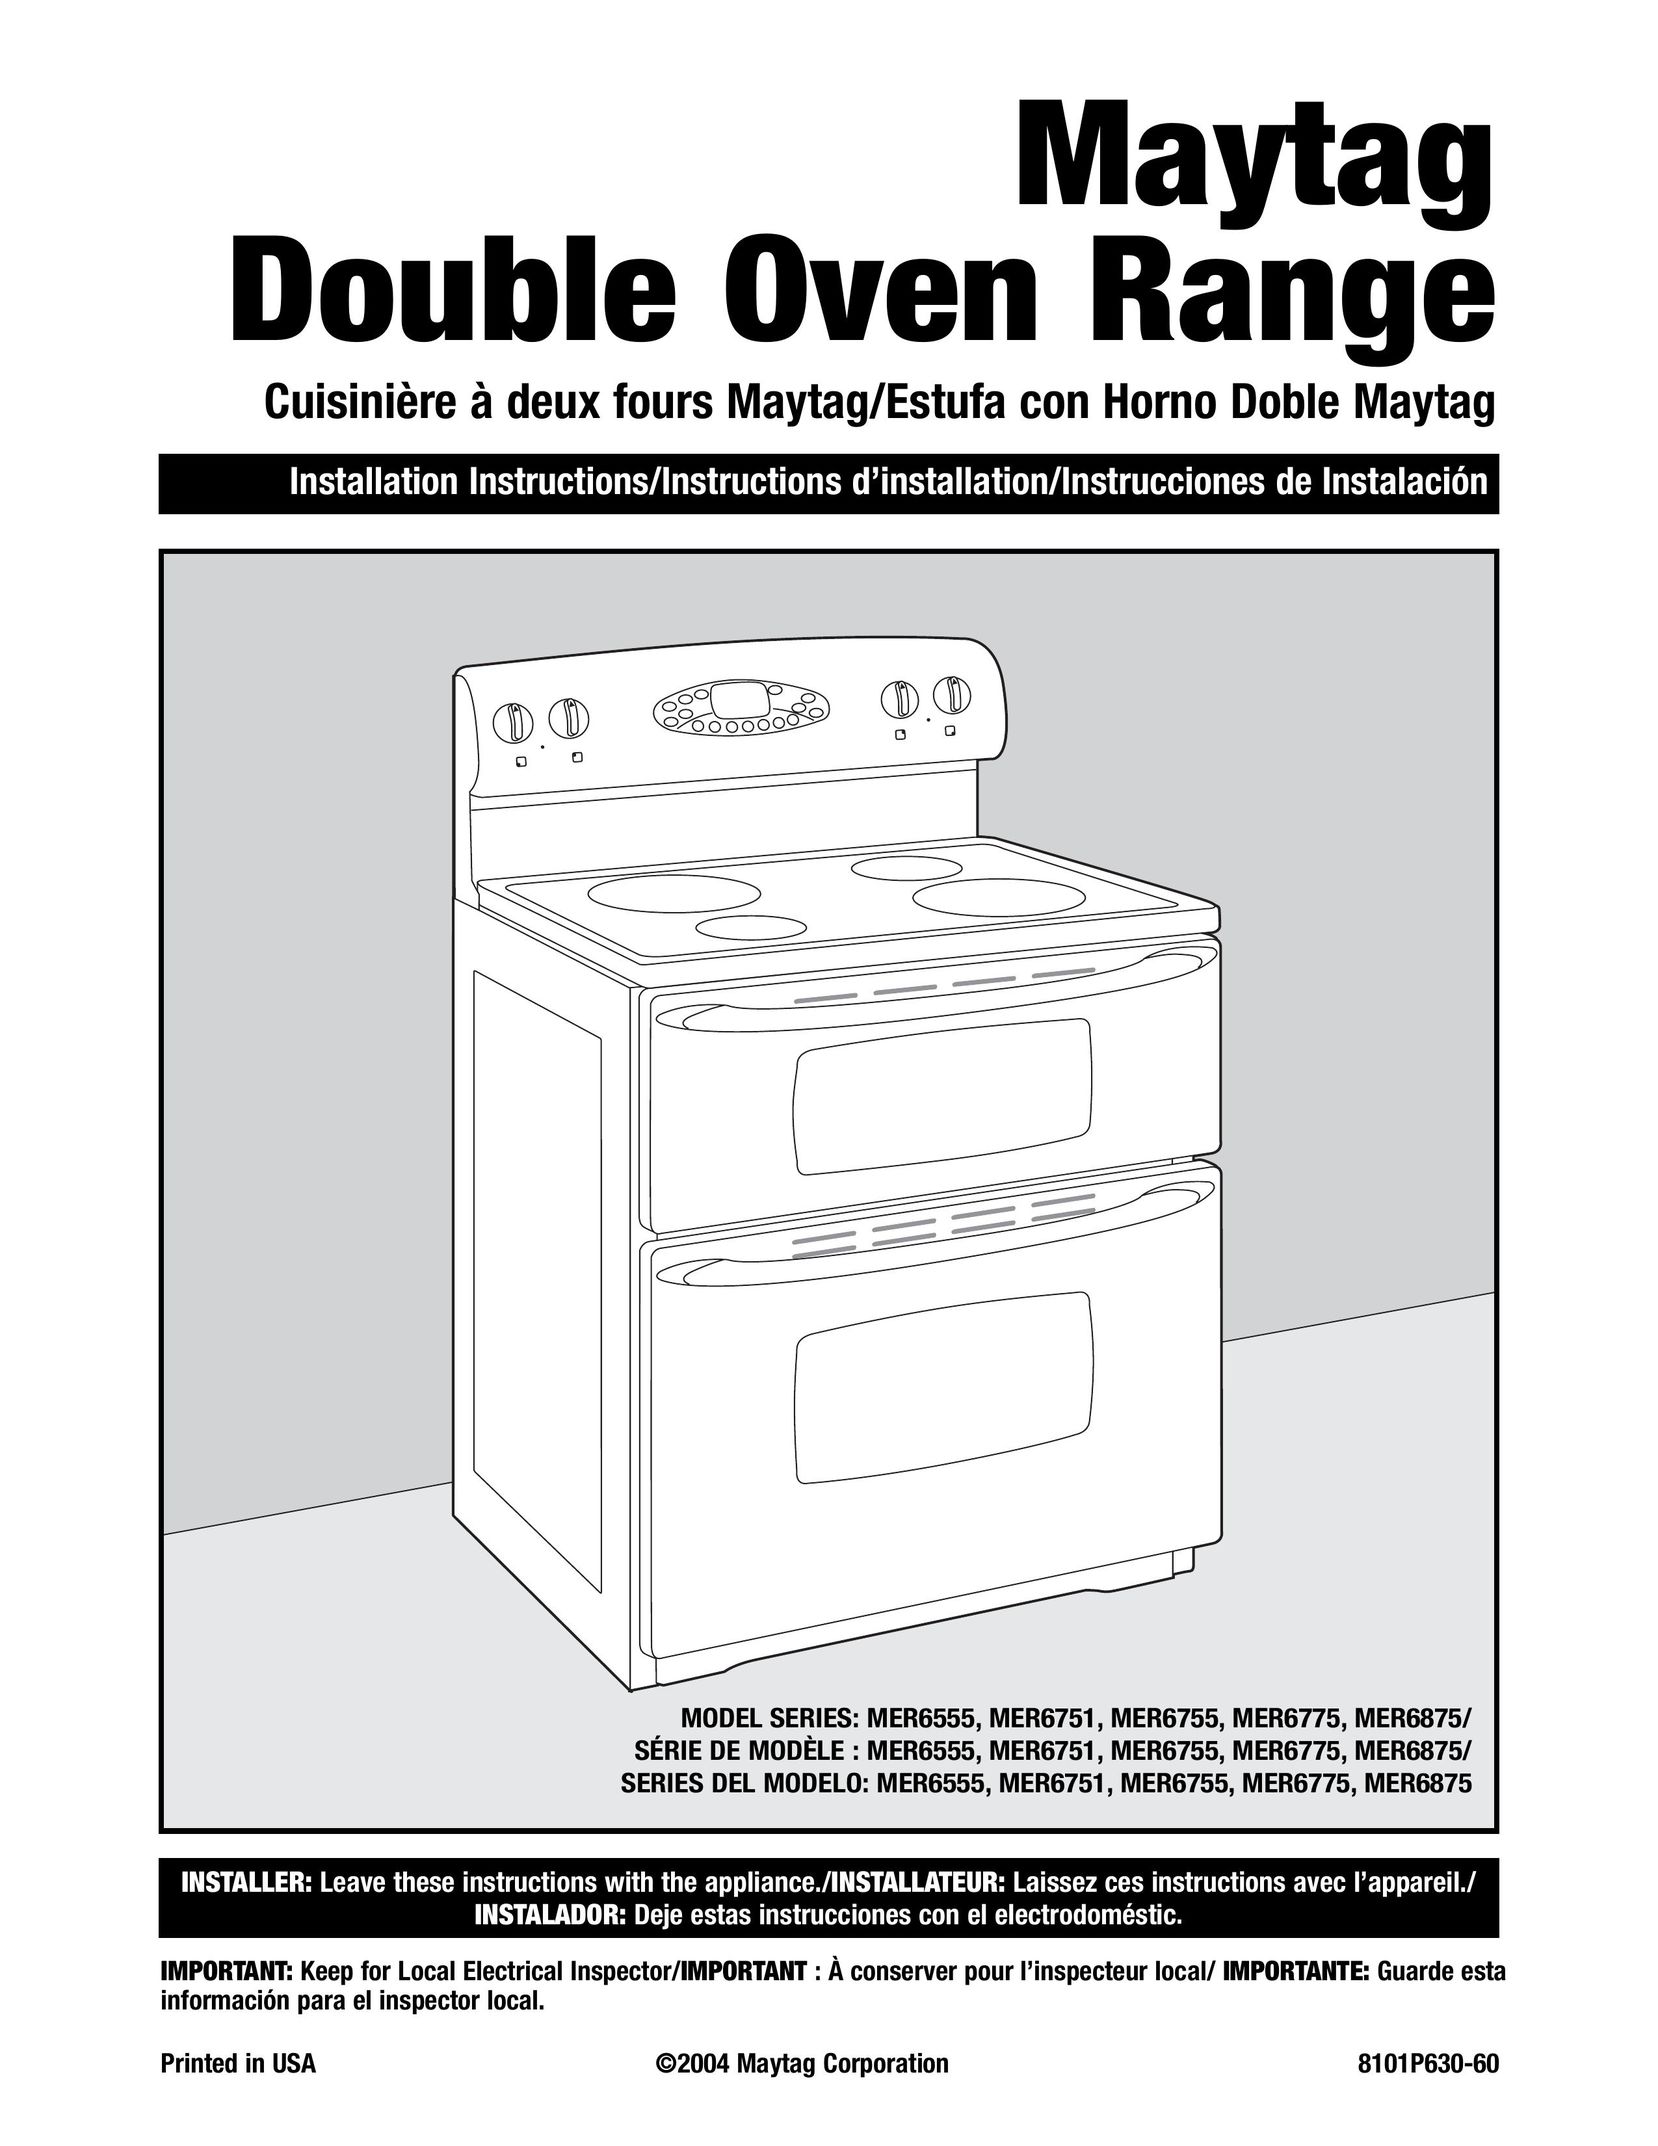 Maytag MER6751 Double Oven User Manual